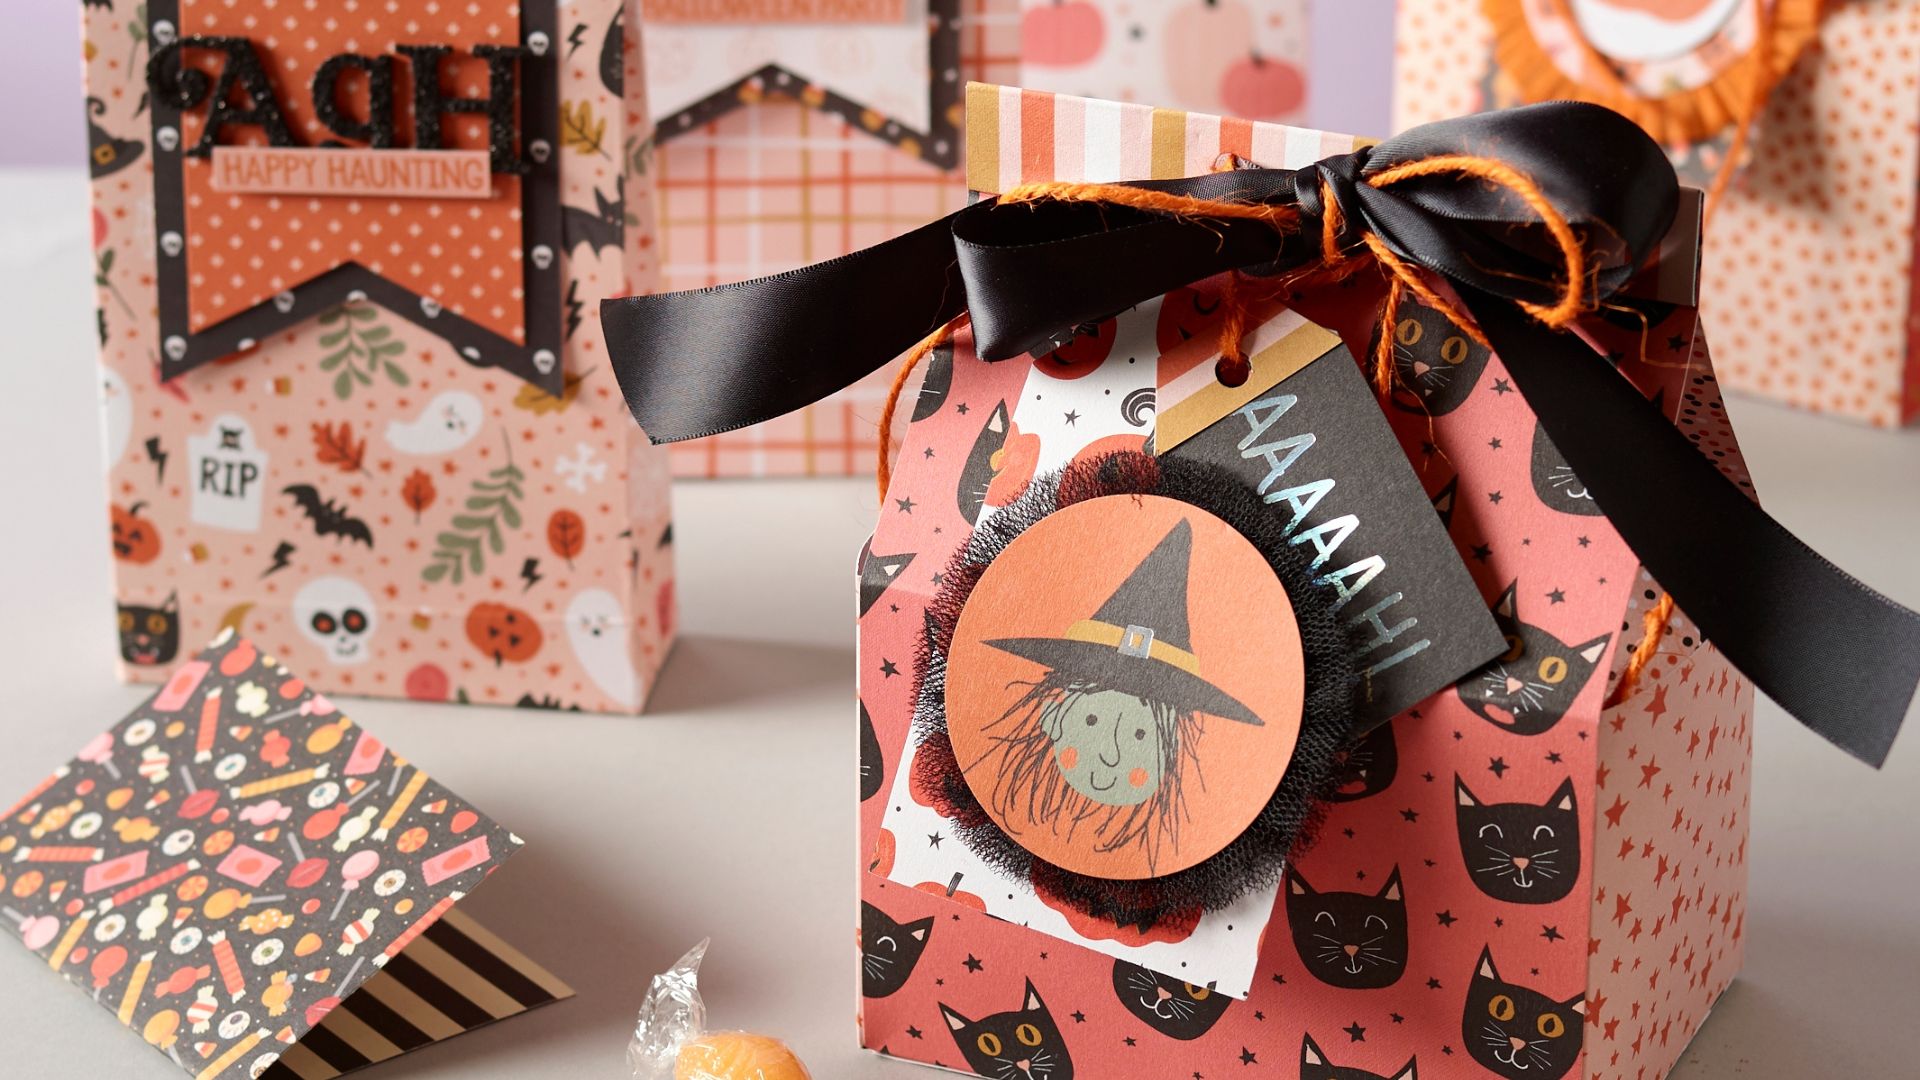 Put together Halloween treat bags & boxes to trick-or-treat